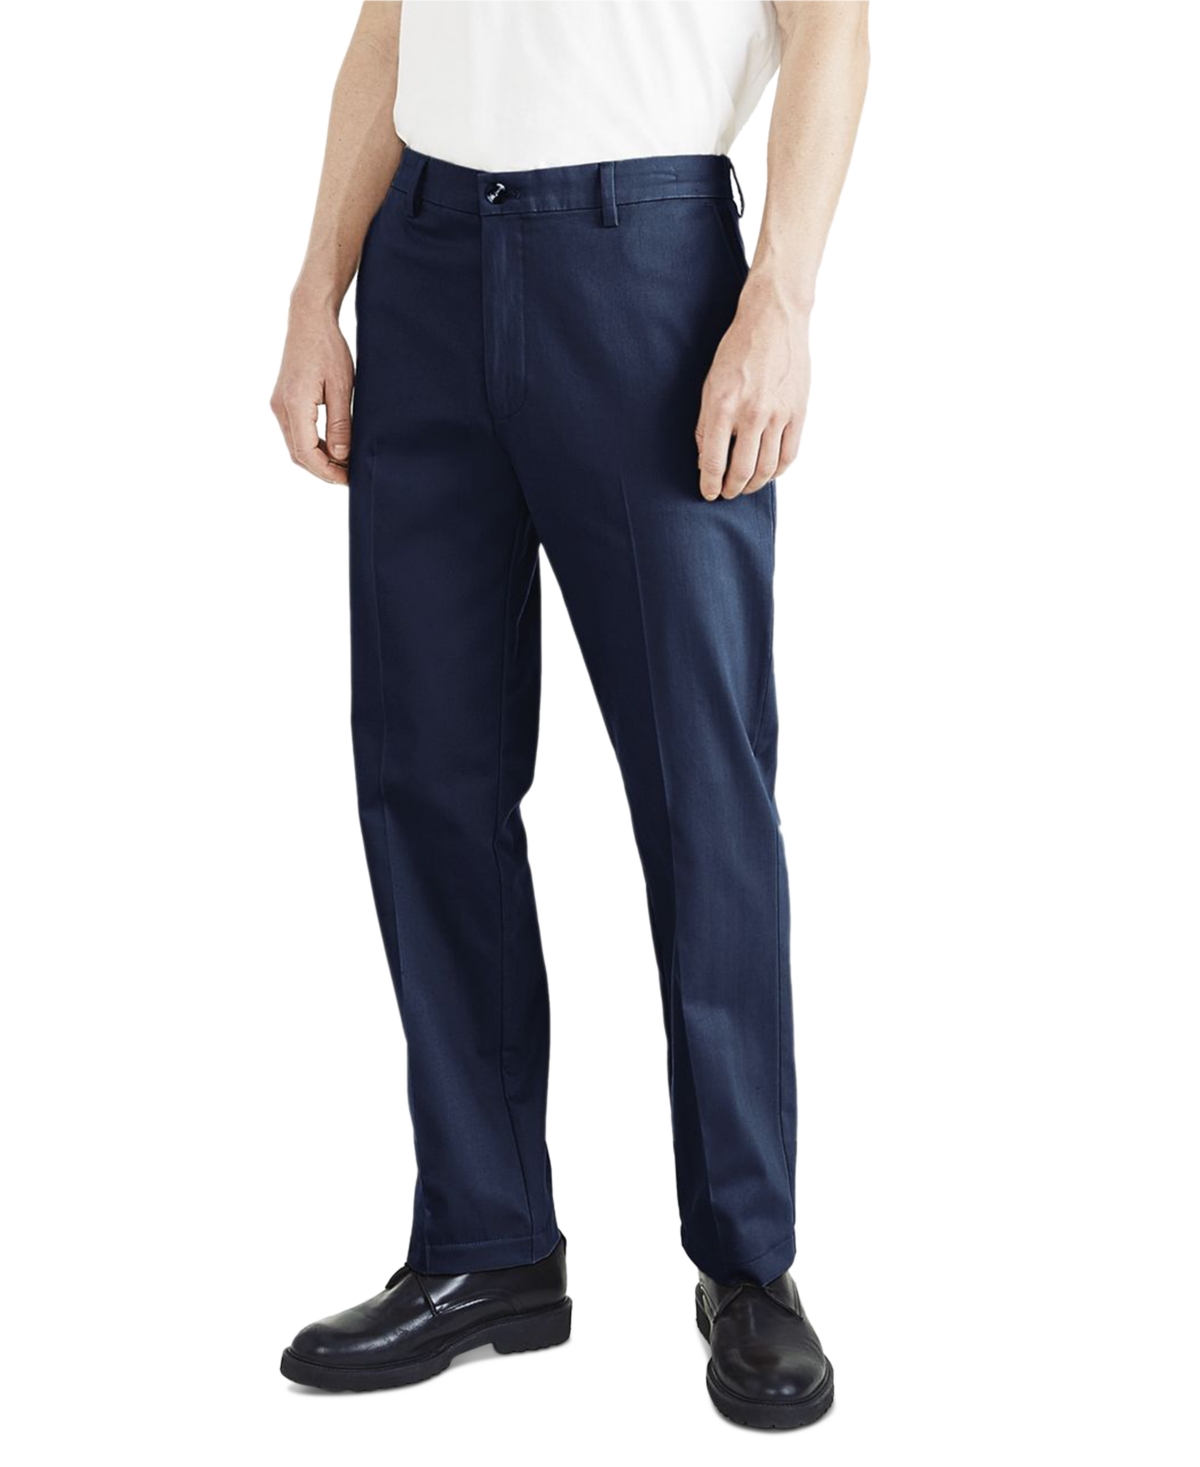 Dockers Men's Signature Straight Fit Iron Free Khaki Pants With Stain Defender In Navy Blazer